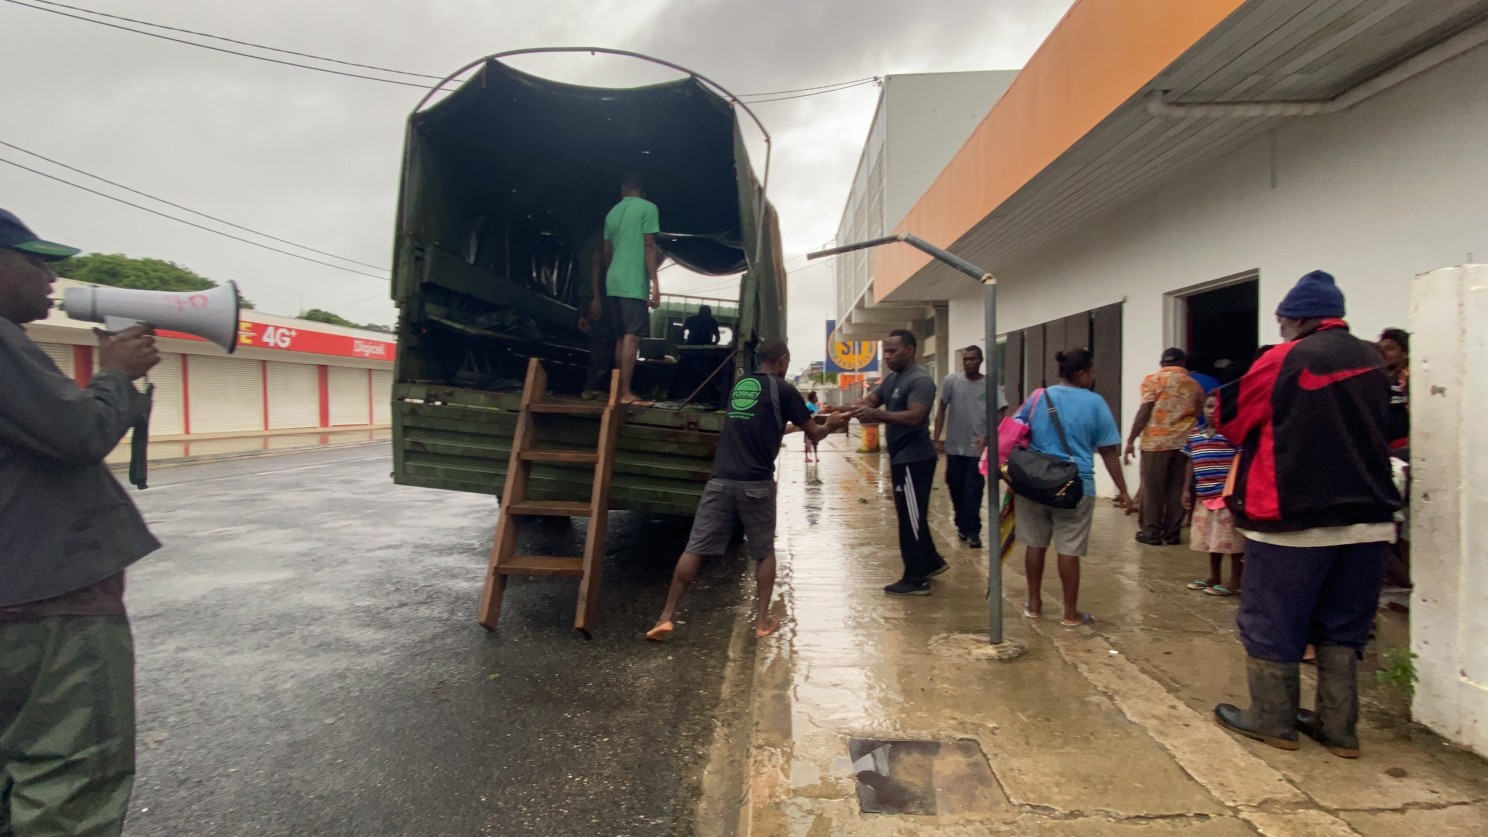 A truck is parked outside a building where people wait to be evacuated as part of the humanitarian support deployed after Tropical Cyclone Harold hit Vanuatu